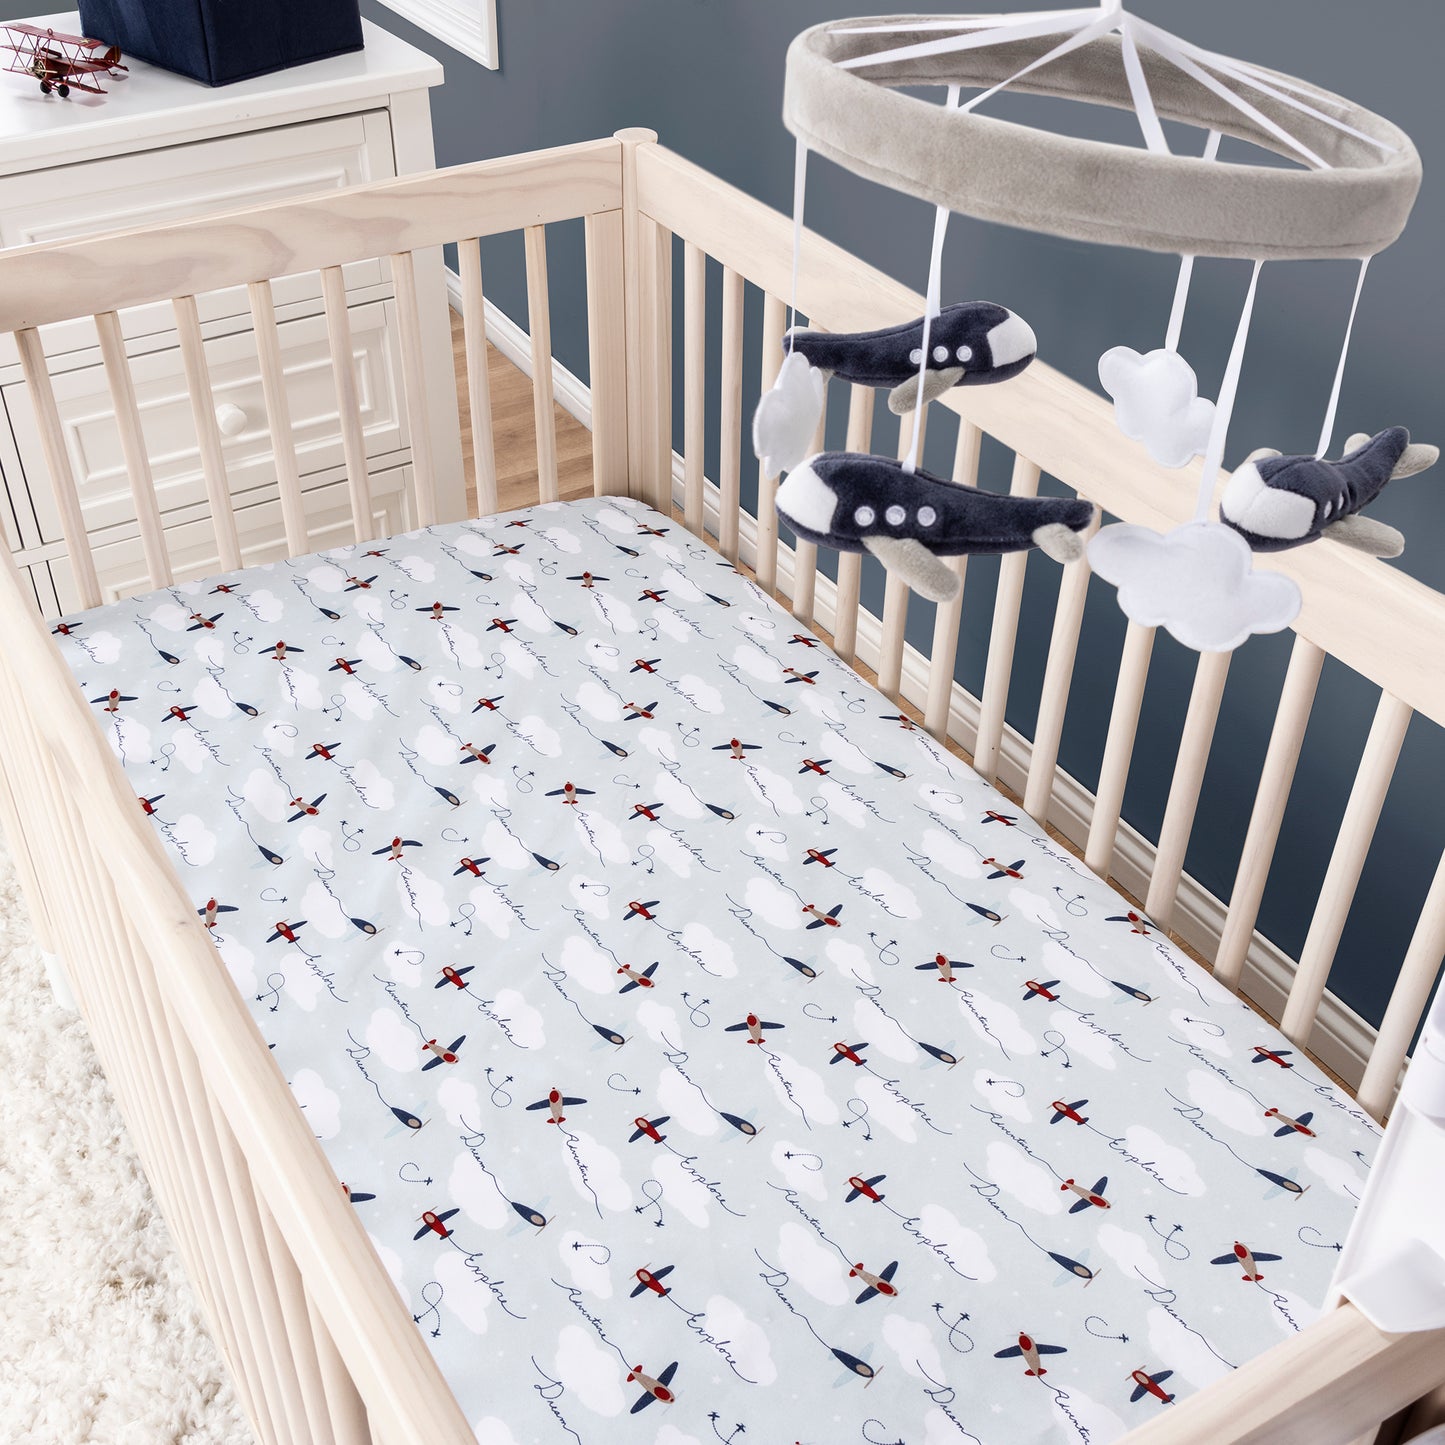 Air Travel 3 Piece Crib Bedding Set by Sammy & Lou®- stylized image of crib sheet with an airplane mobile feature